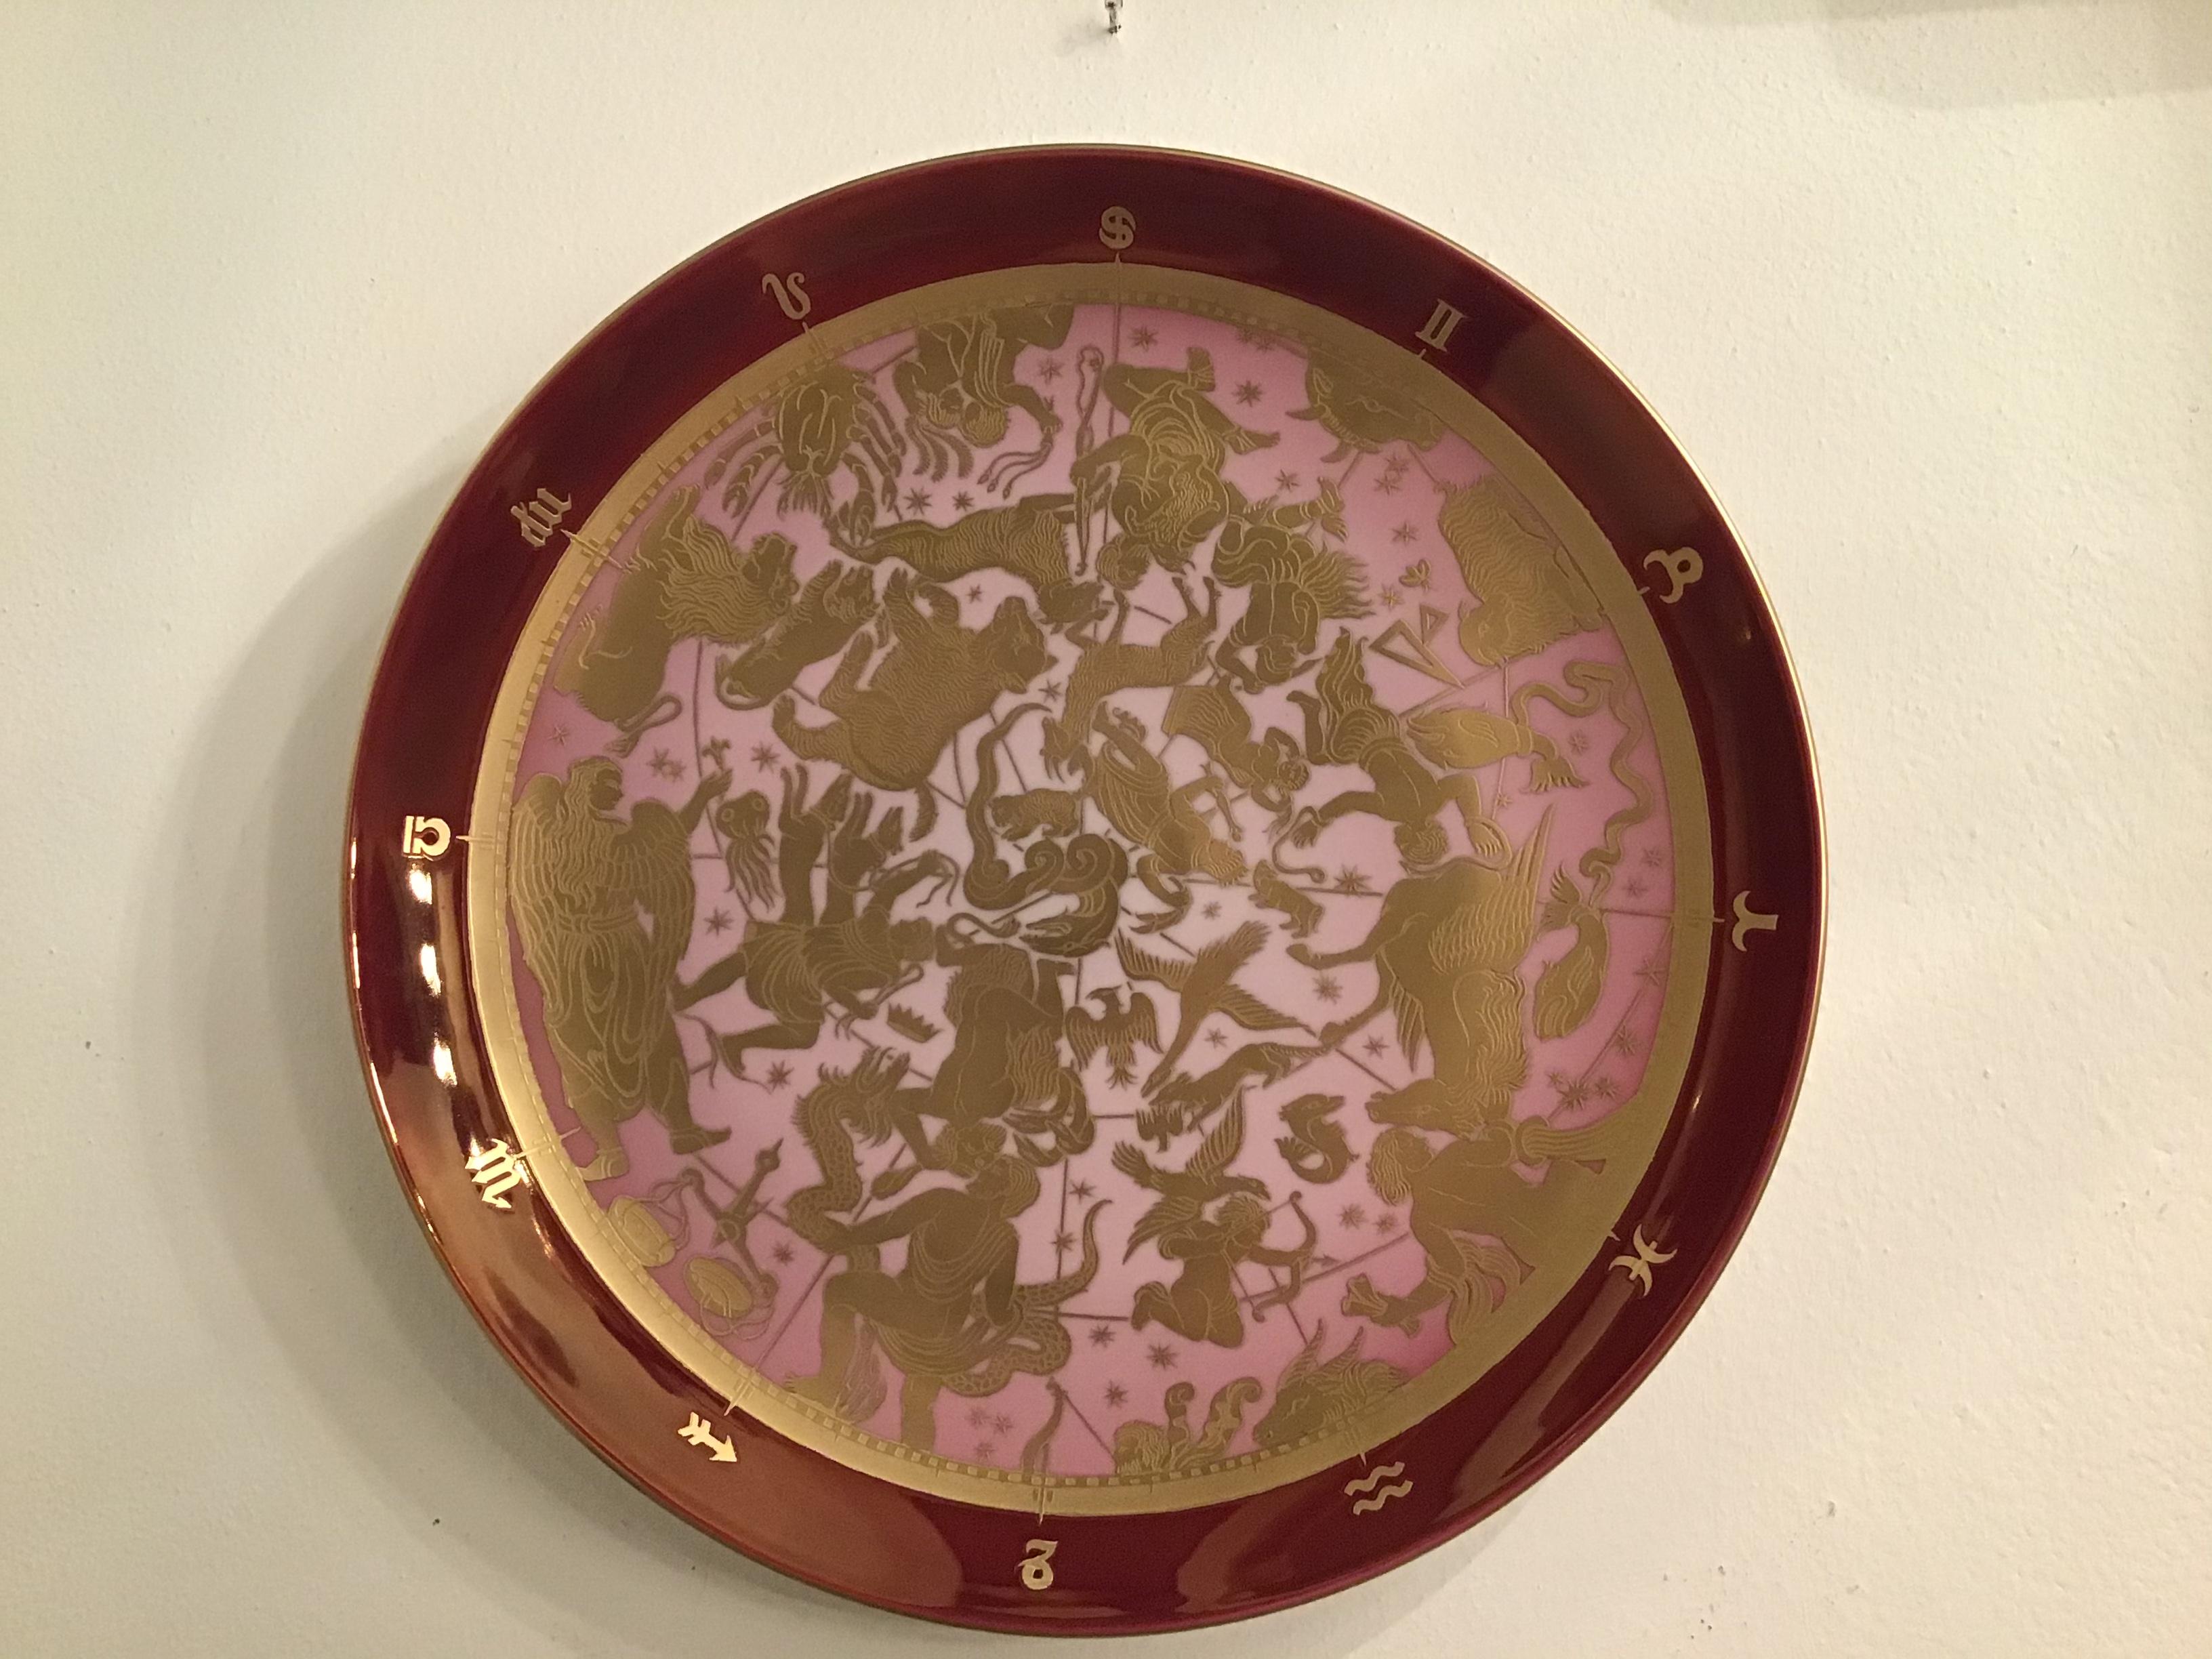 Morbelli Porcelain Wall Plate “Planisfero Celeste” Worked with Pure Gold 1960 It For Sale 7